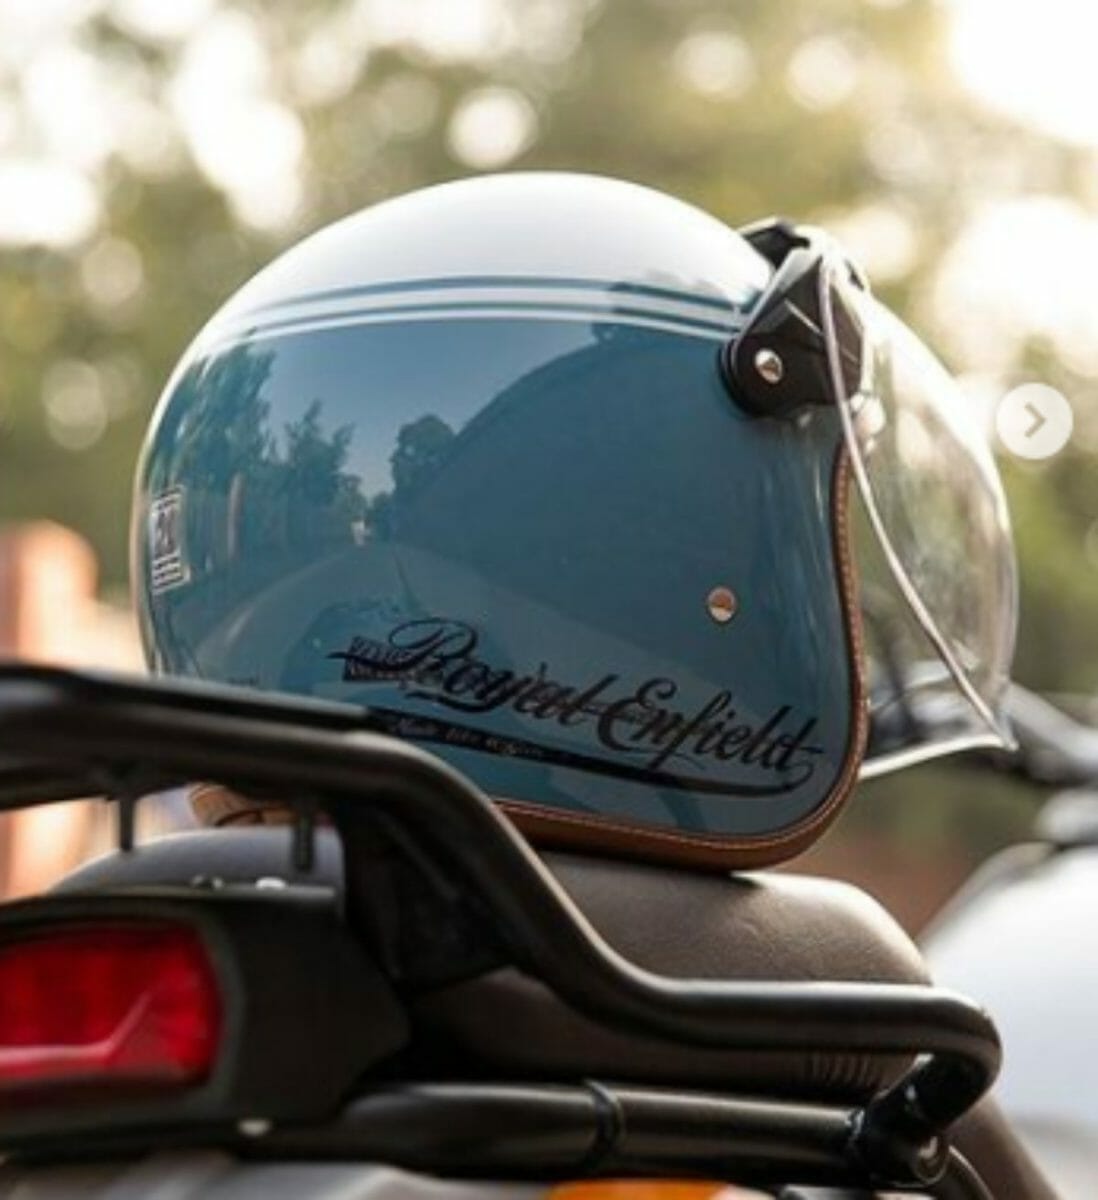 Royal enfield Limited edition helmet (3)